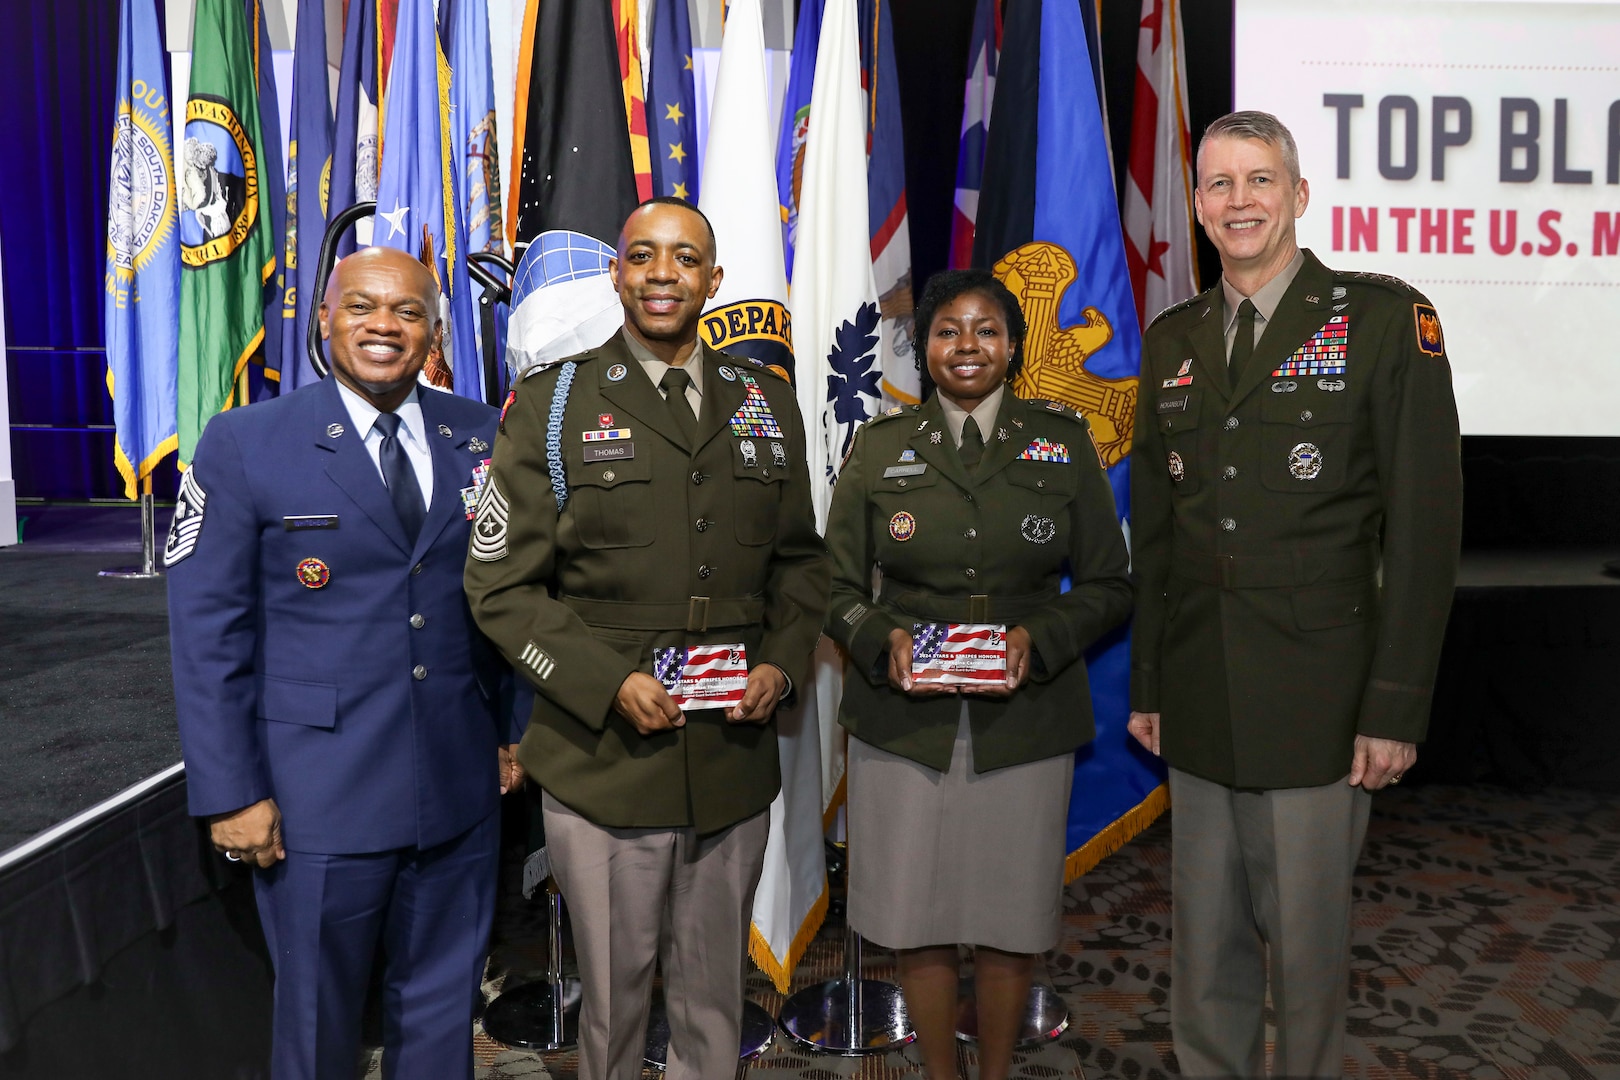 From left, Senior Enlisted Advisor Tony Whitehead, SEA to the chief, National Guard Bureau; Sgt. Maj. Alan Thomas, operations sergeant major, Indiana National Guard; Chief Warrant Officer 3 Regina Carrell, a senior strategic intelligence analyst at the National Guard Bureau, and Army Gen. Daniel Hokanson, chief, National Guard Bureau, at the Black Engineer of the Year Award Science, Technology, Engineering and Mathematics Stars and Stripes dinner and reception, Baltimore, Maryland, Feb. 16, 2024. The National Guard Bureau was the featured military organization of the 2024 Stars and Stripes event.